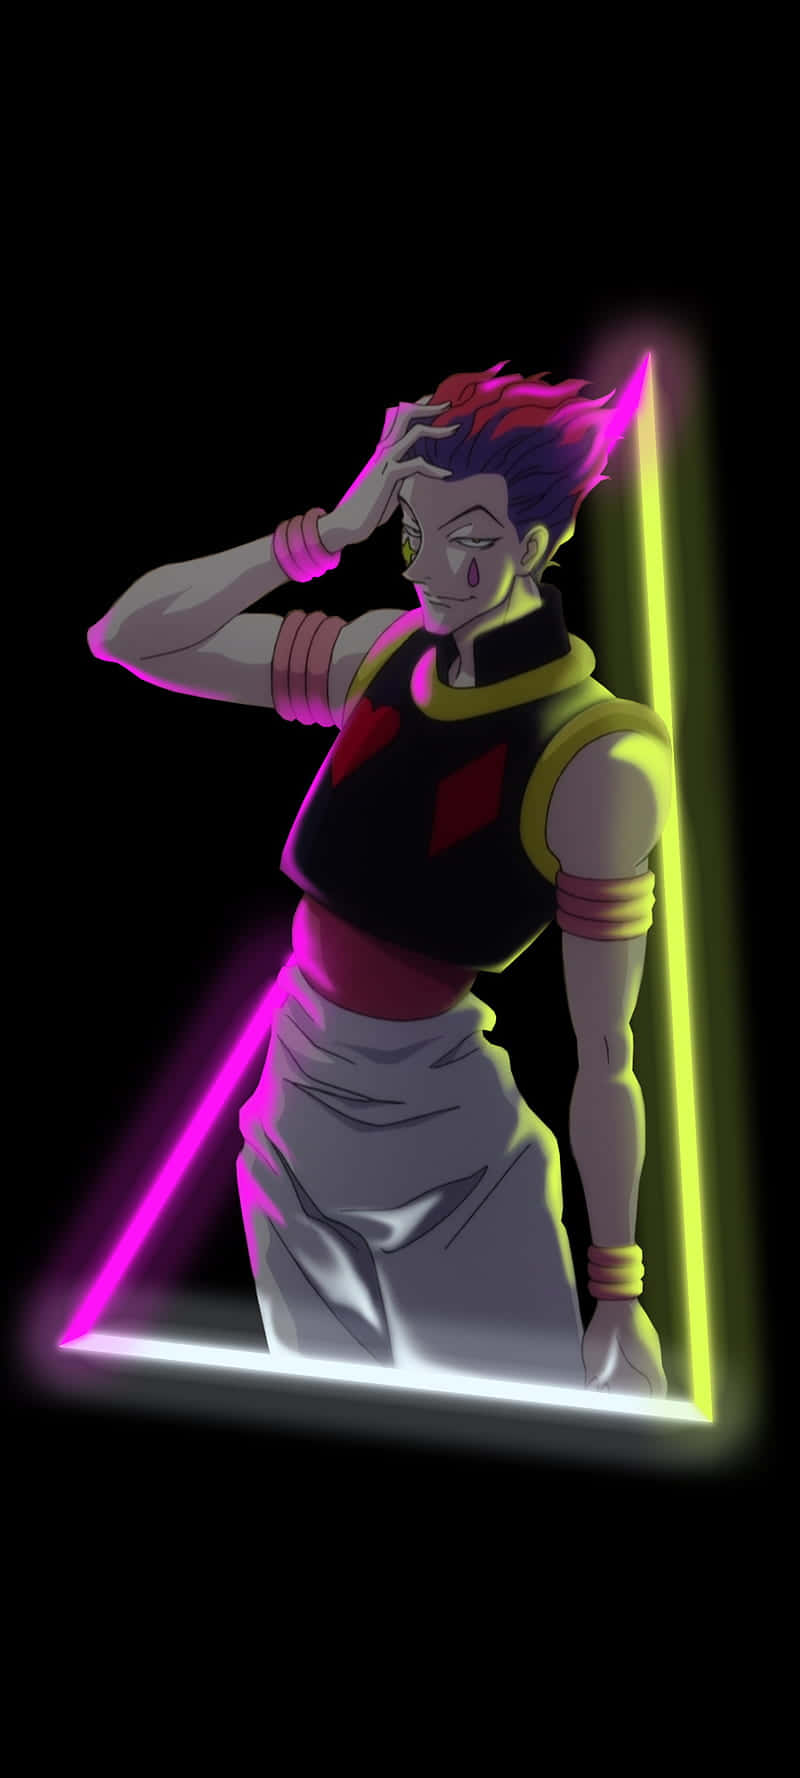 A Neon Colored Image Of A Character In A Triangle Wallpaper